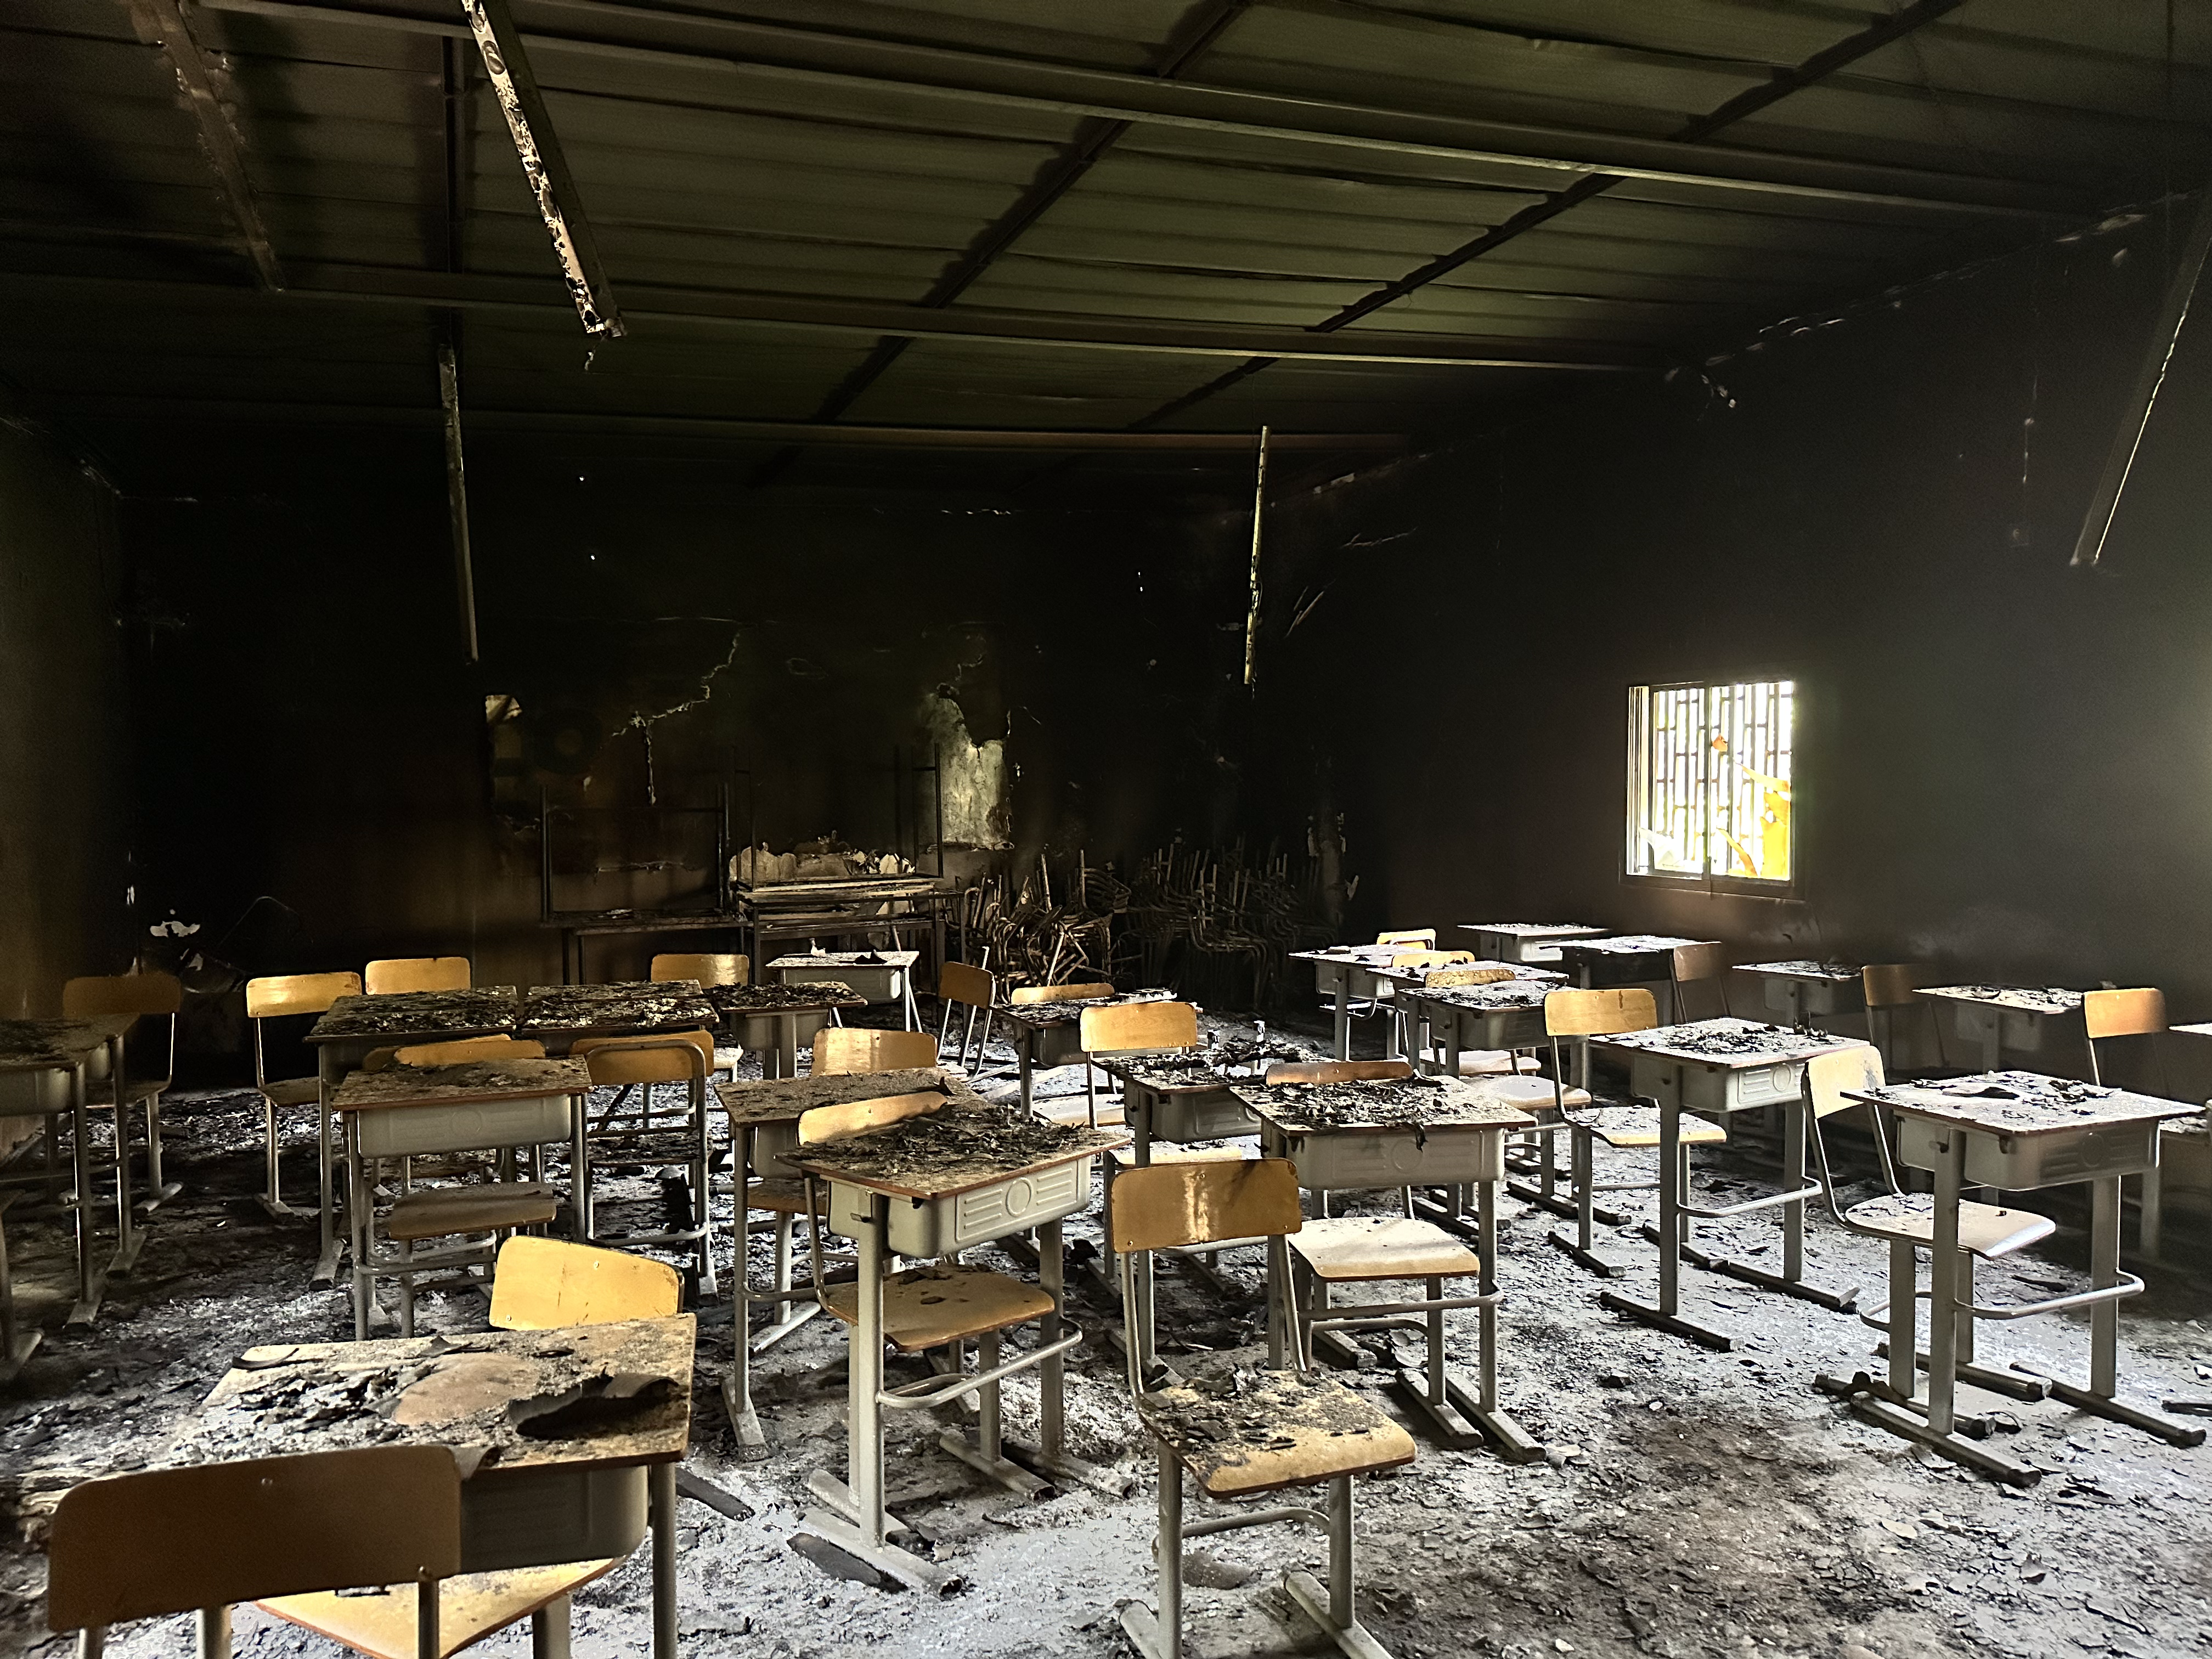 photo of a classroom with desks burned by fire